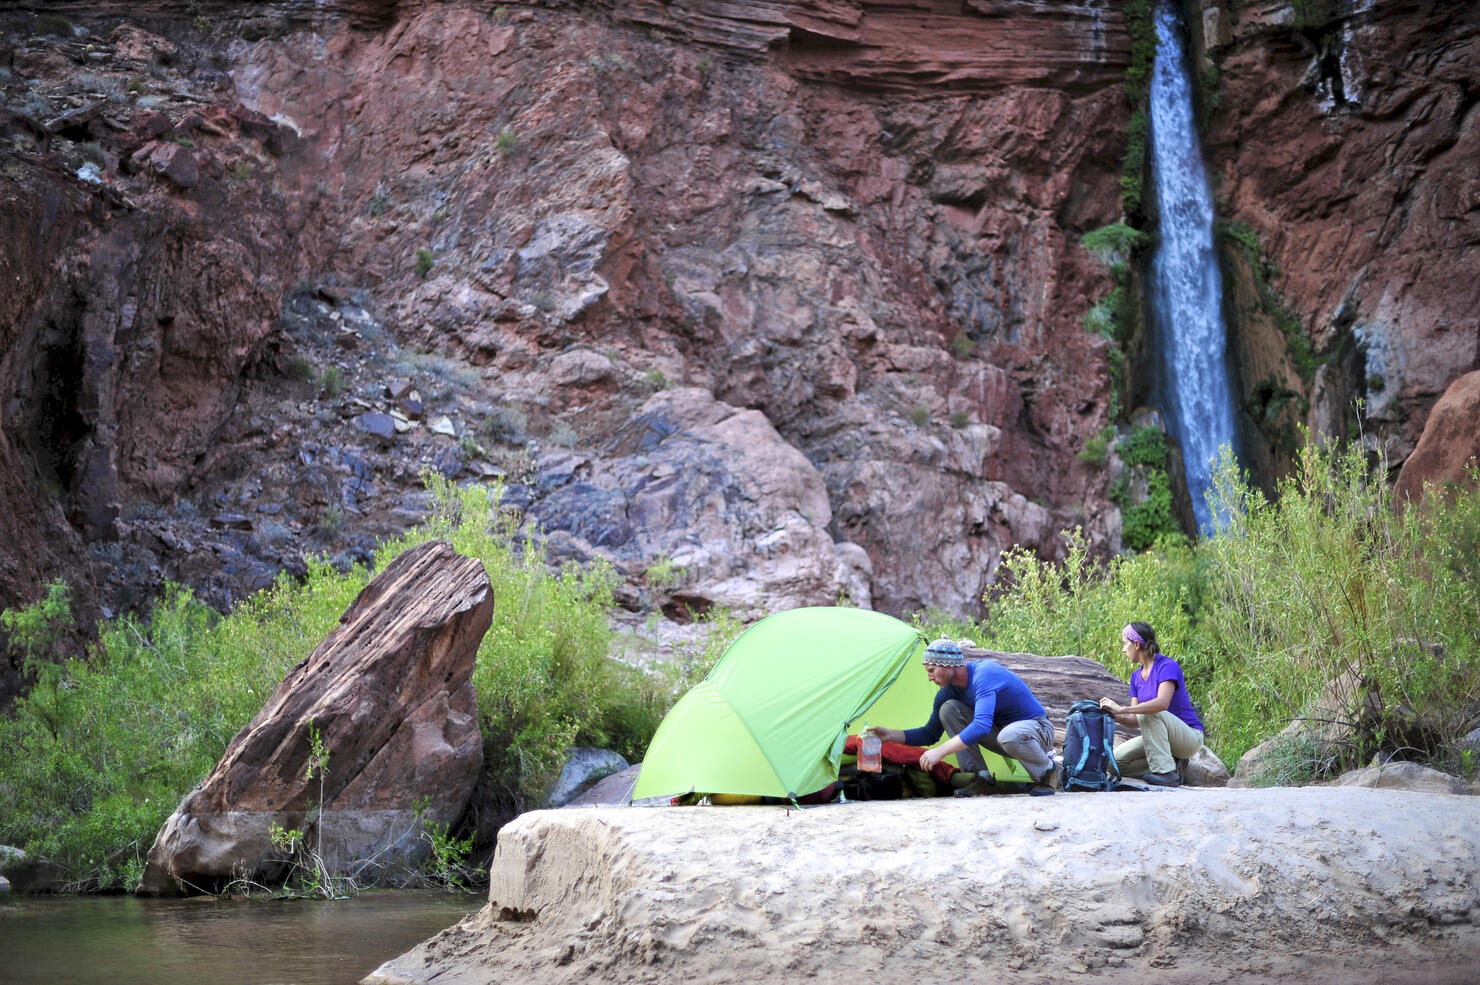 Hikers setup camp on a beach along the Colorado River near the plumeting 180-foot Deer Creek Falls in the Grand Canyon outside of Fredonia, Arizona November 2011.